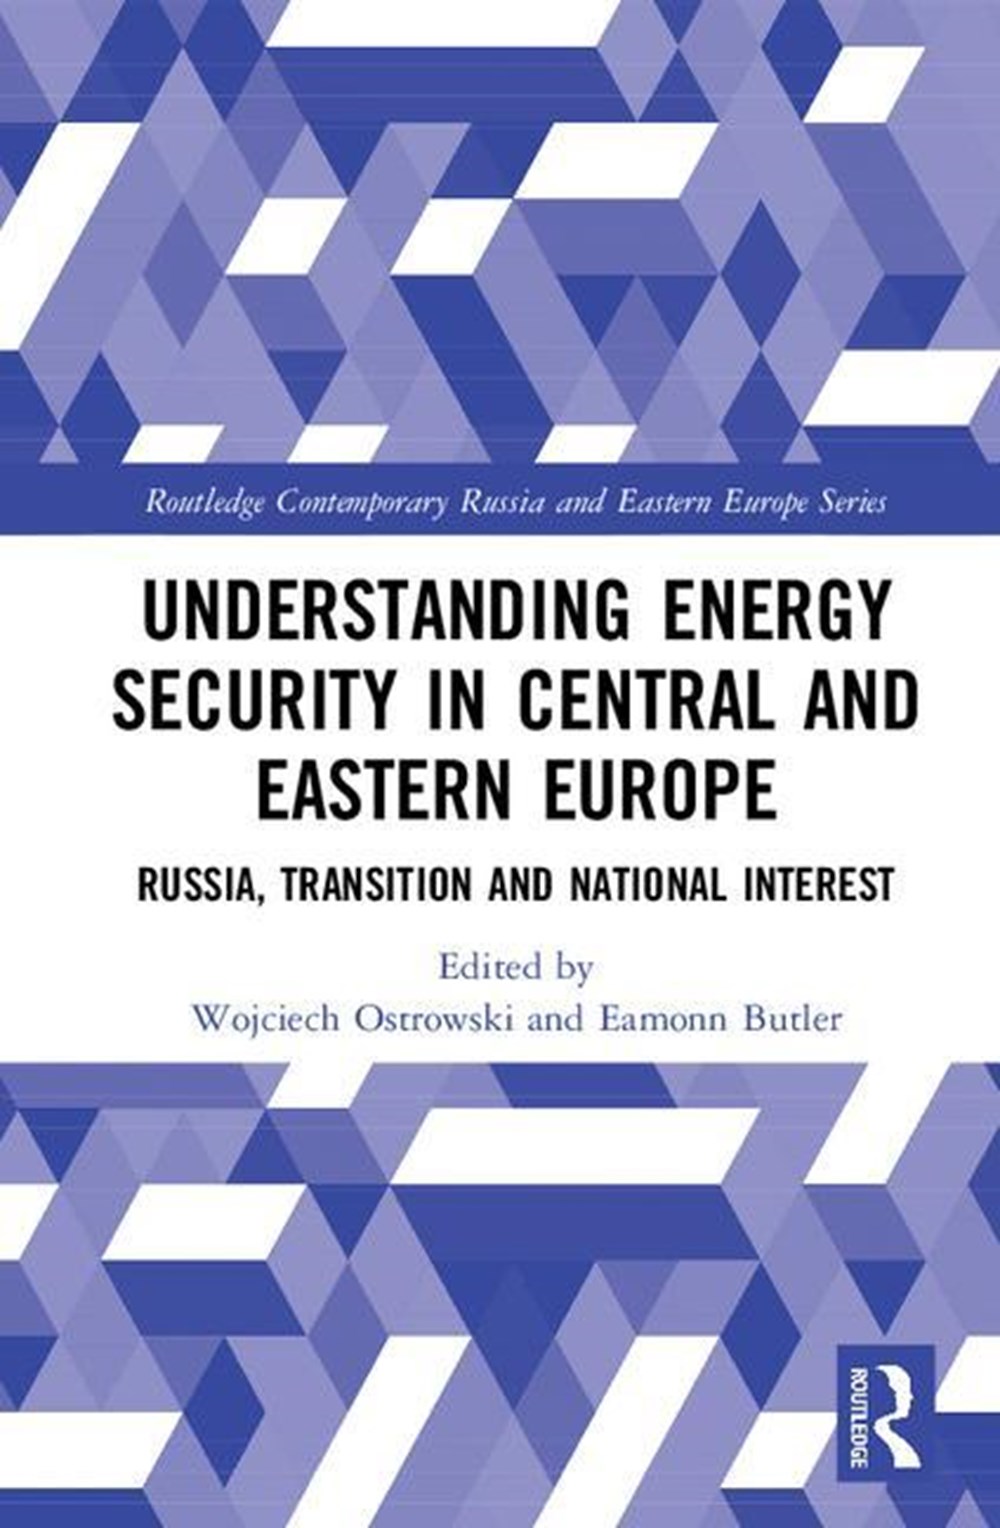 Understanding Energy Security in Central and Eastern Europe: Russia, Transition and National Interes